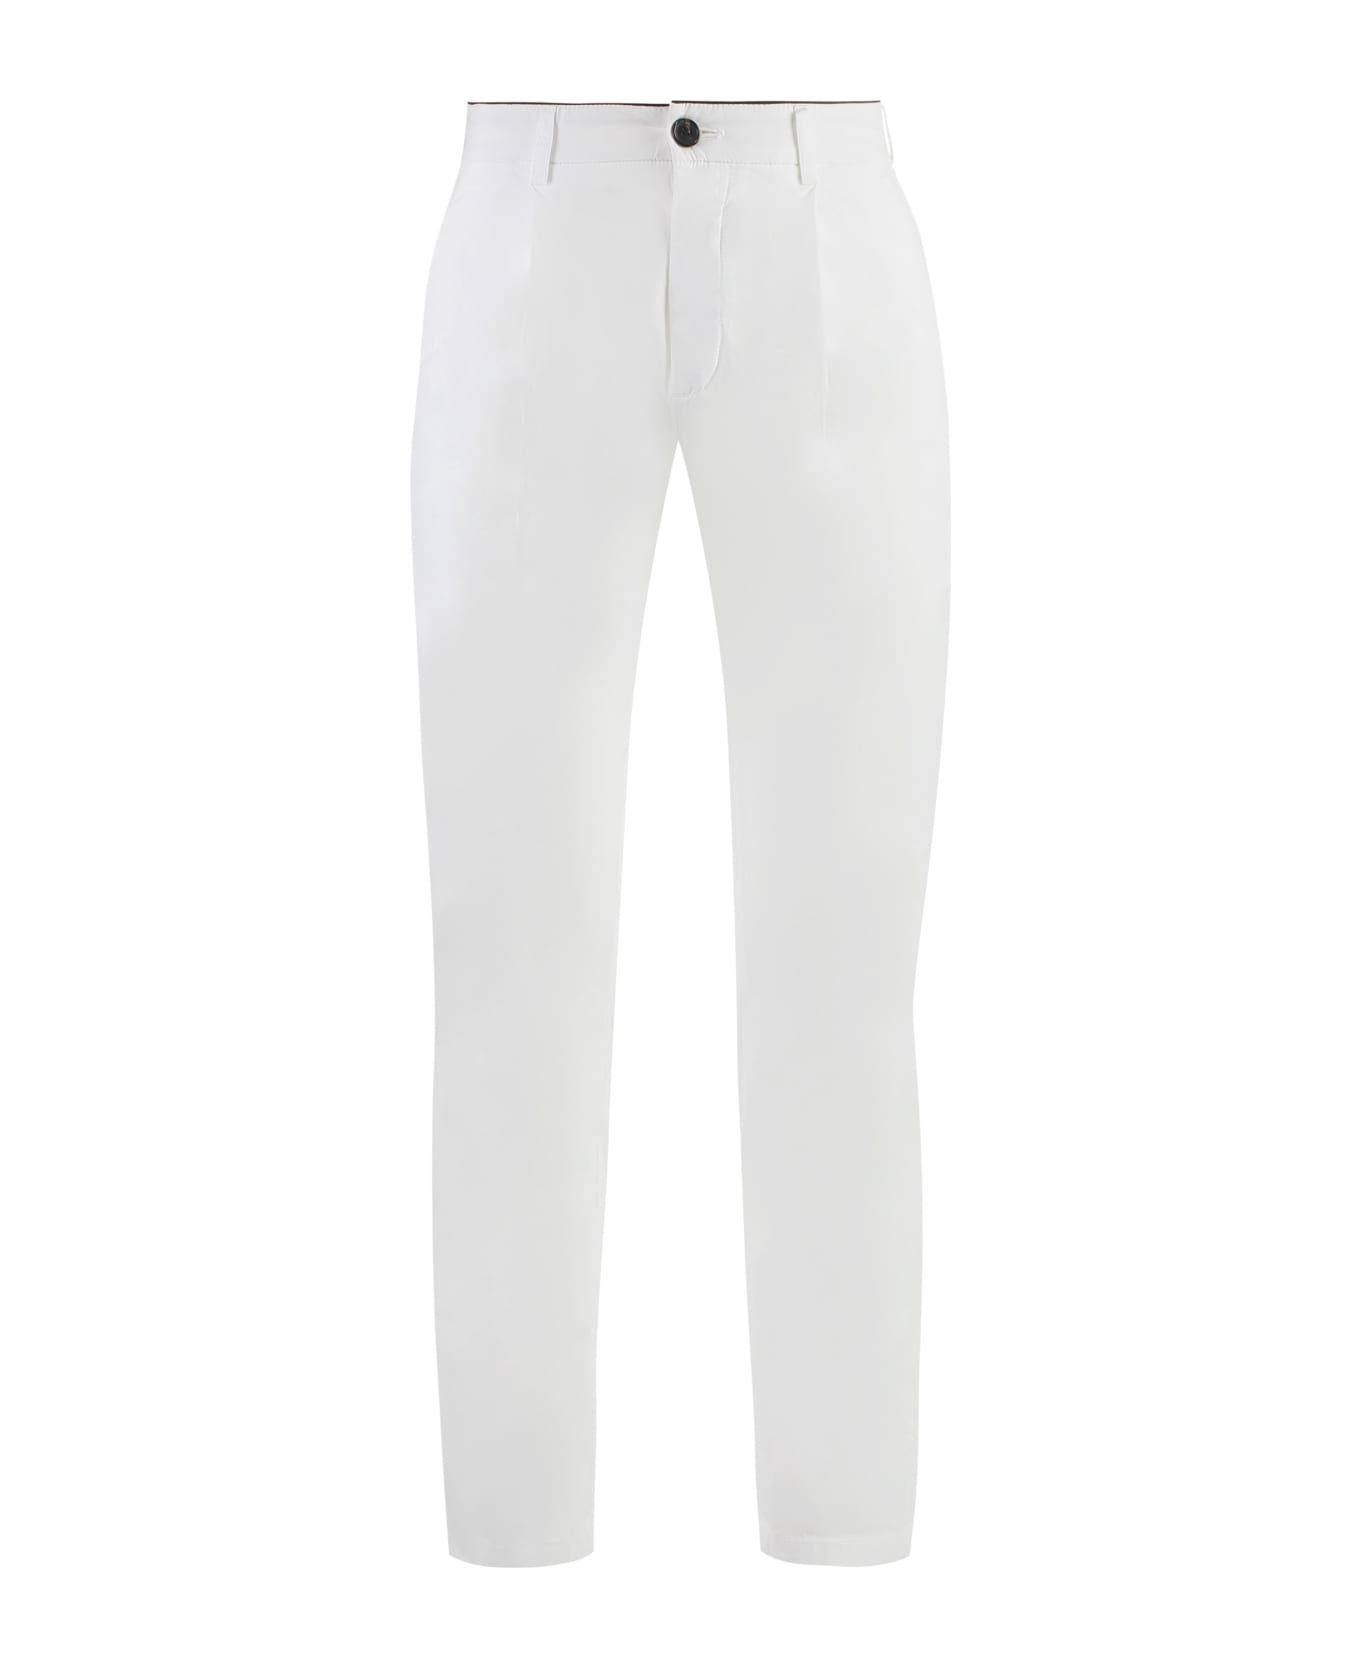 Department Five Prince Chino Pants - White